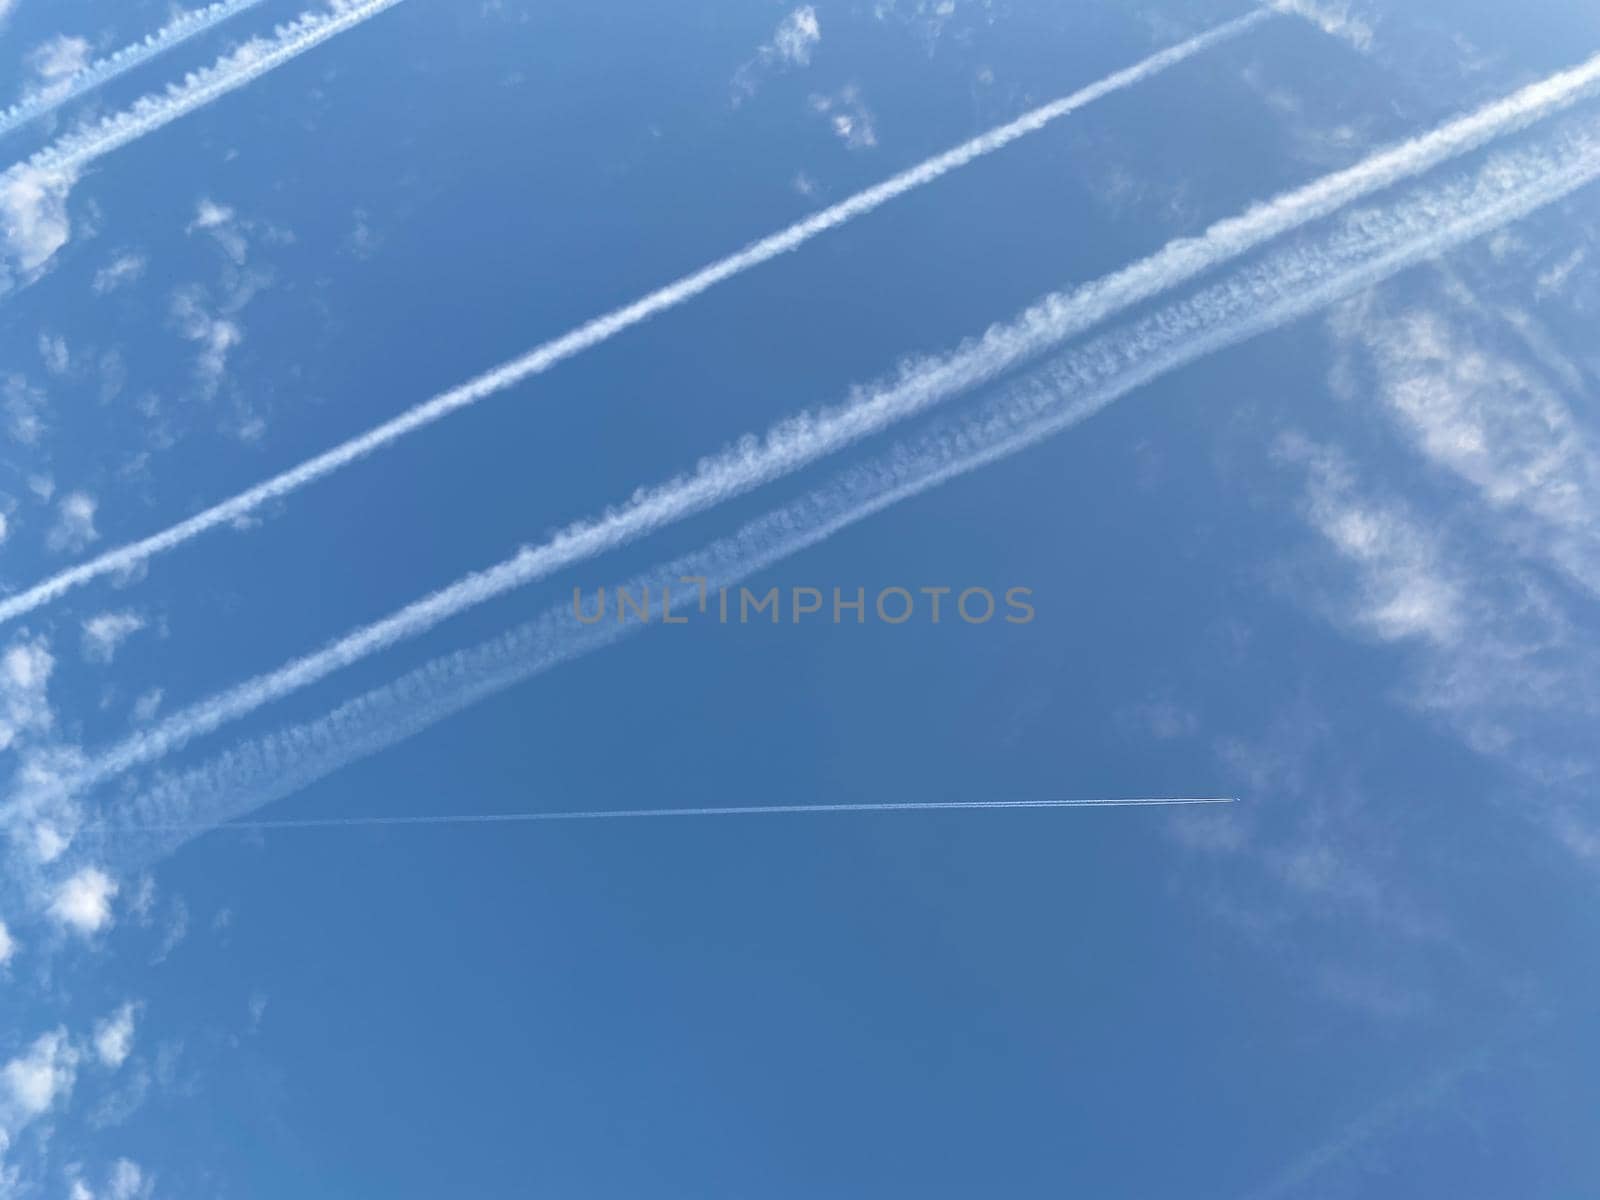 Airplane in the blue sky with clouds from below. High flying passenger plane with condensation trail. Jets flying overhead diagonally in sky with sunlight. Bottom view